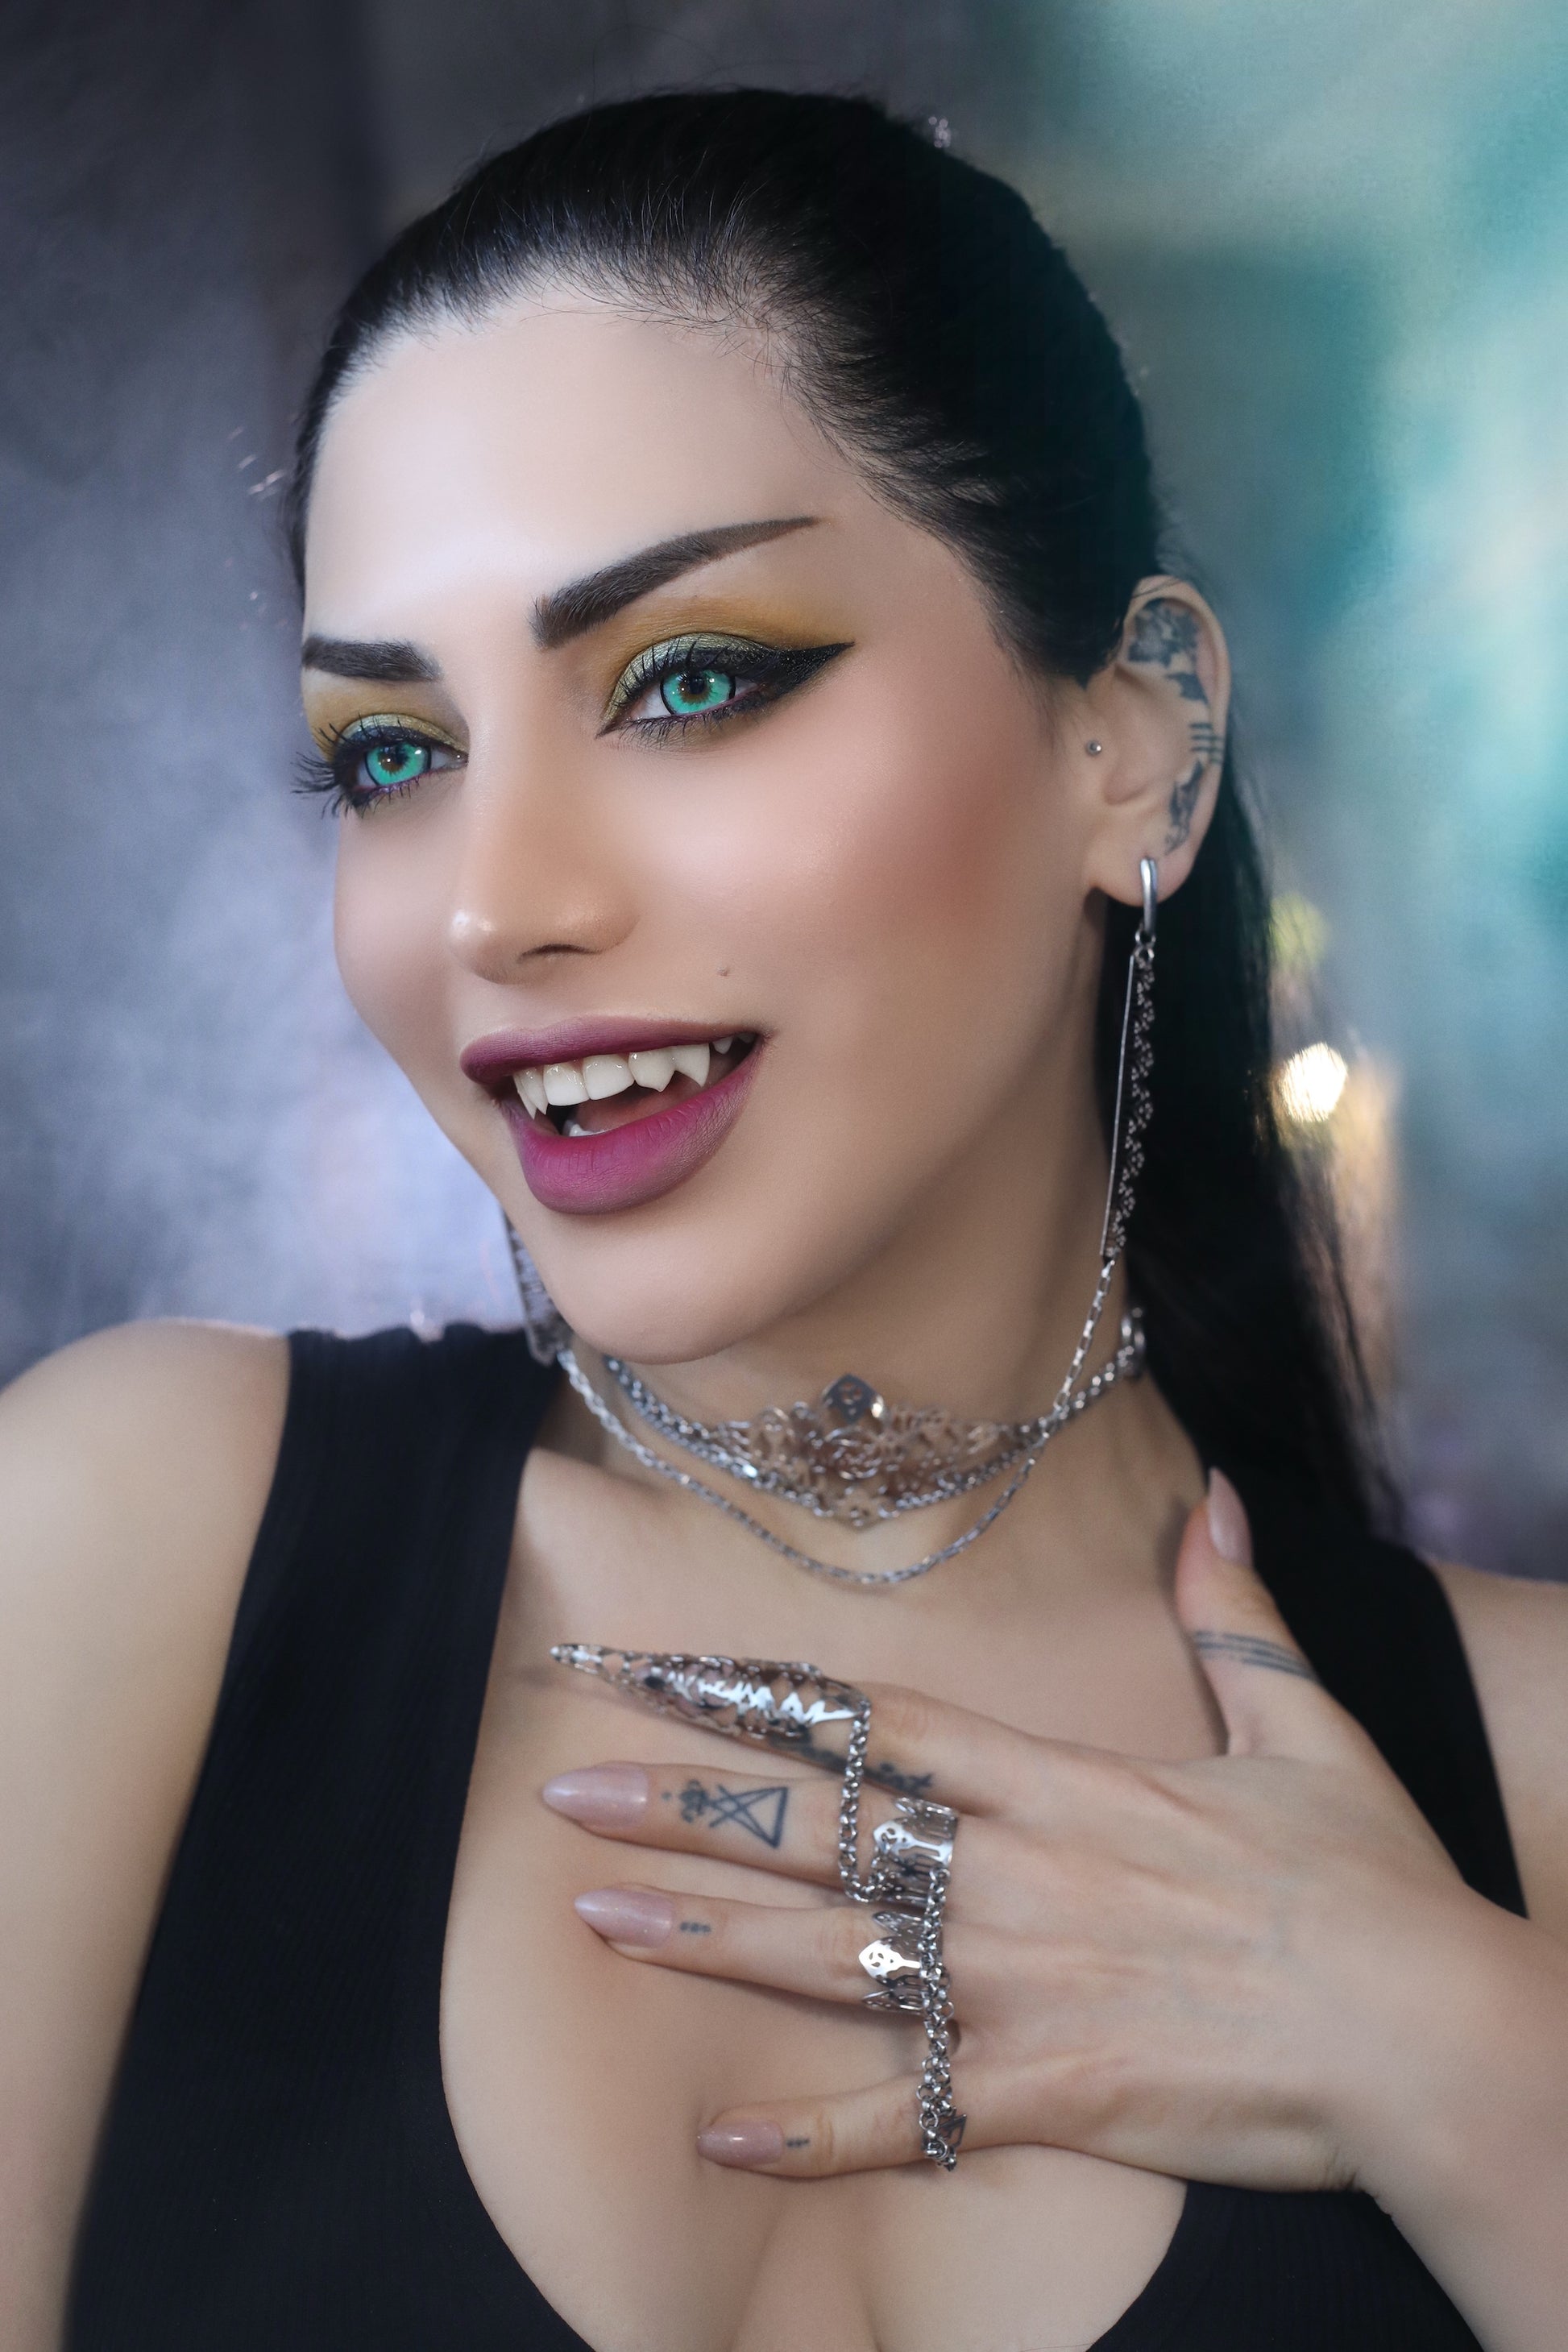 A woman models Myril Jewels' sophisticated handcrafted jewelry: a dramatic double ring connected by a slender chain, featuring claw-like detailing and gothic arch patterns, and intricate filigree work that echoes neo-gothic design. The ensemble is completed with matching elaborate earrings and multi-layered necklaces, which encapsulate the brand’s dark-avantgarde aesthetic, perfect for gothic and alternative fashion aficionados seeking bold and unique accessories.